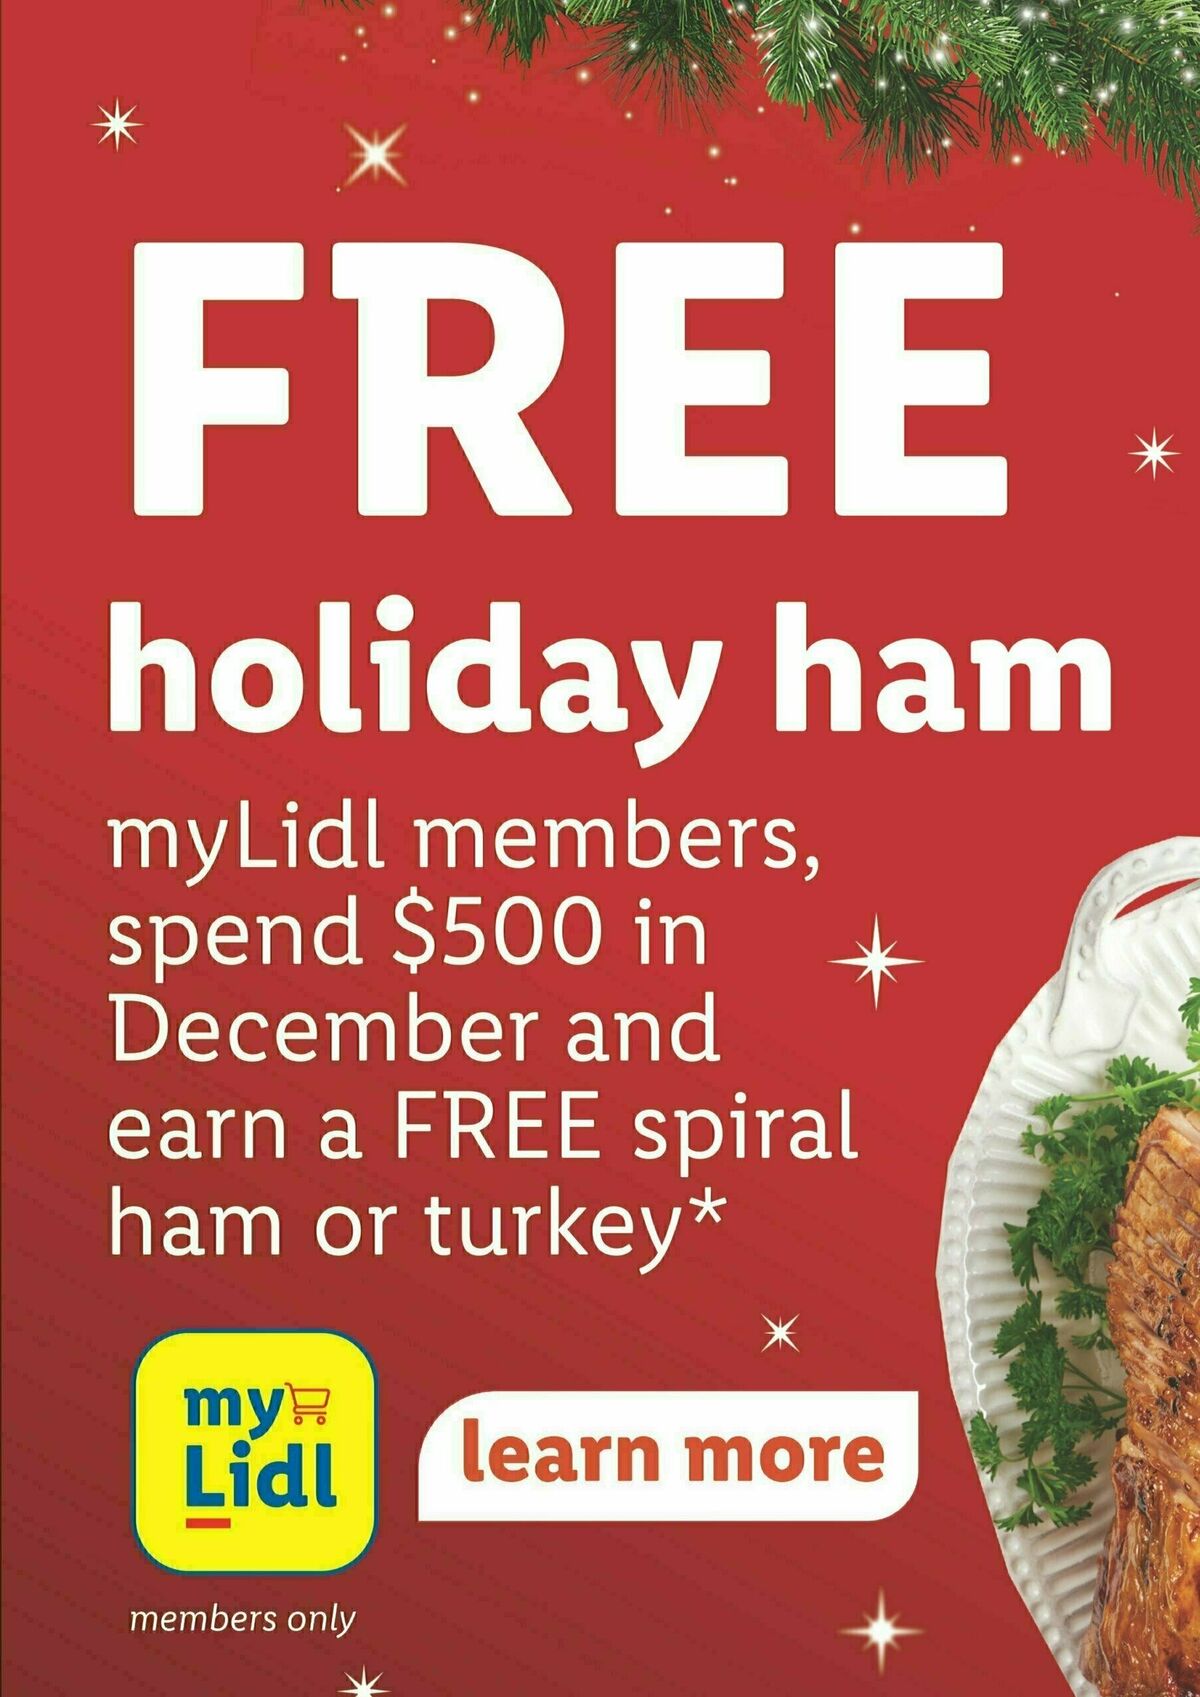 LIDL Weekly Ad from December 20